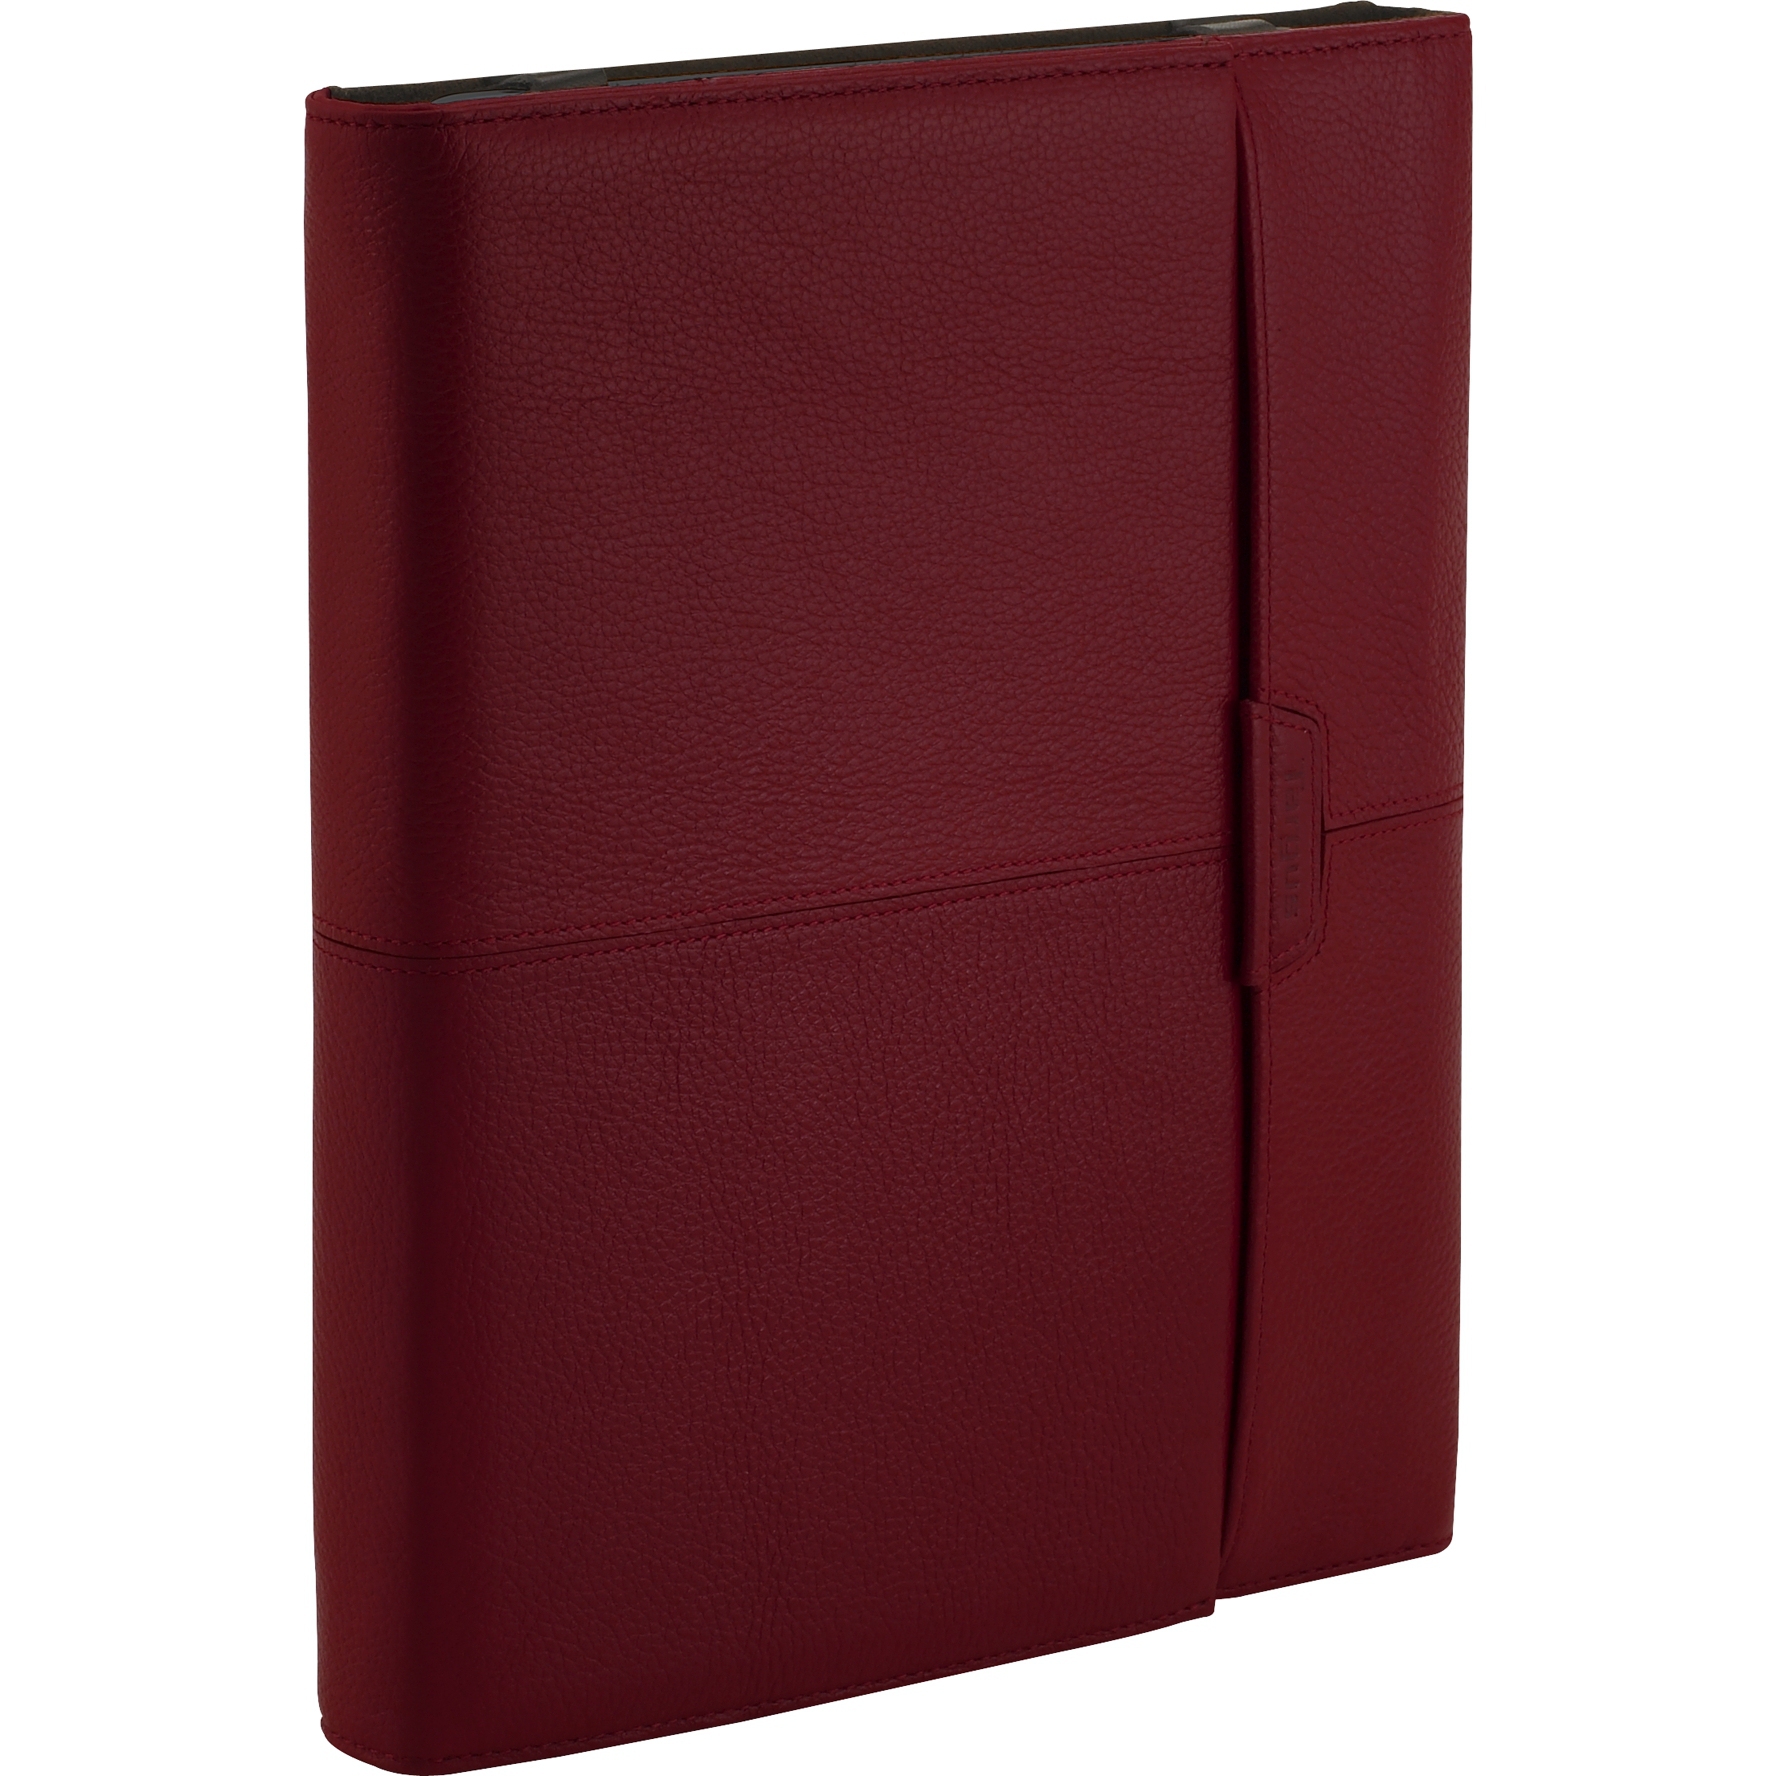 ZIERRA LEATHER PORTFOLIO FOR KINDLE 3 RED/BRWN